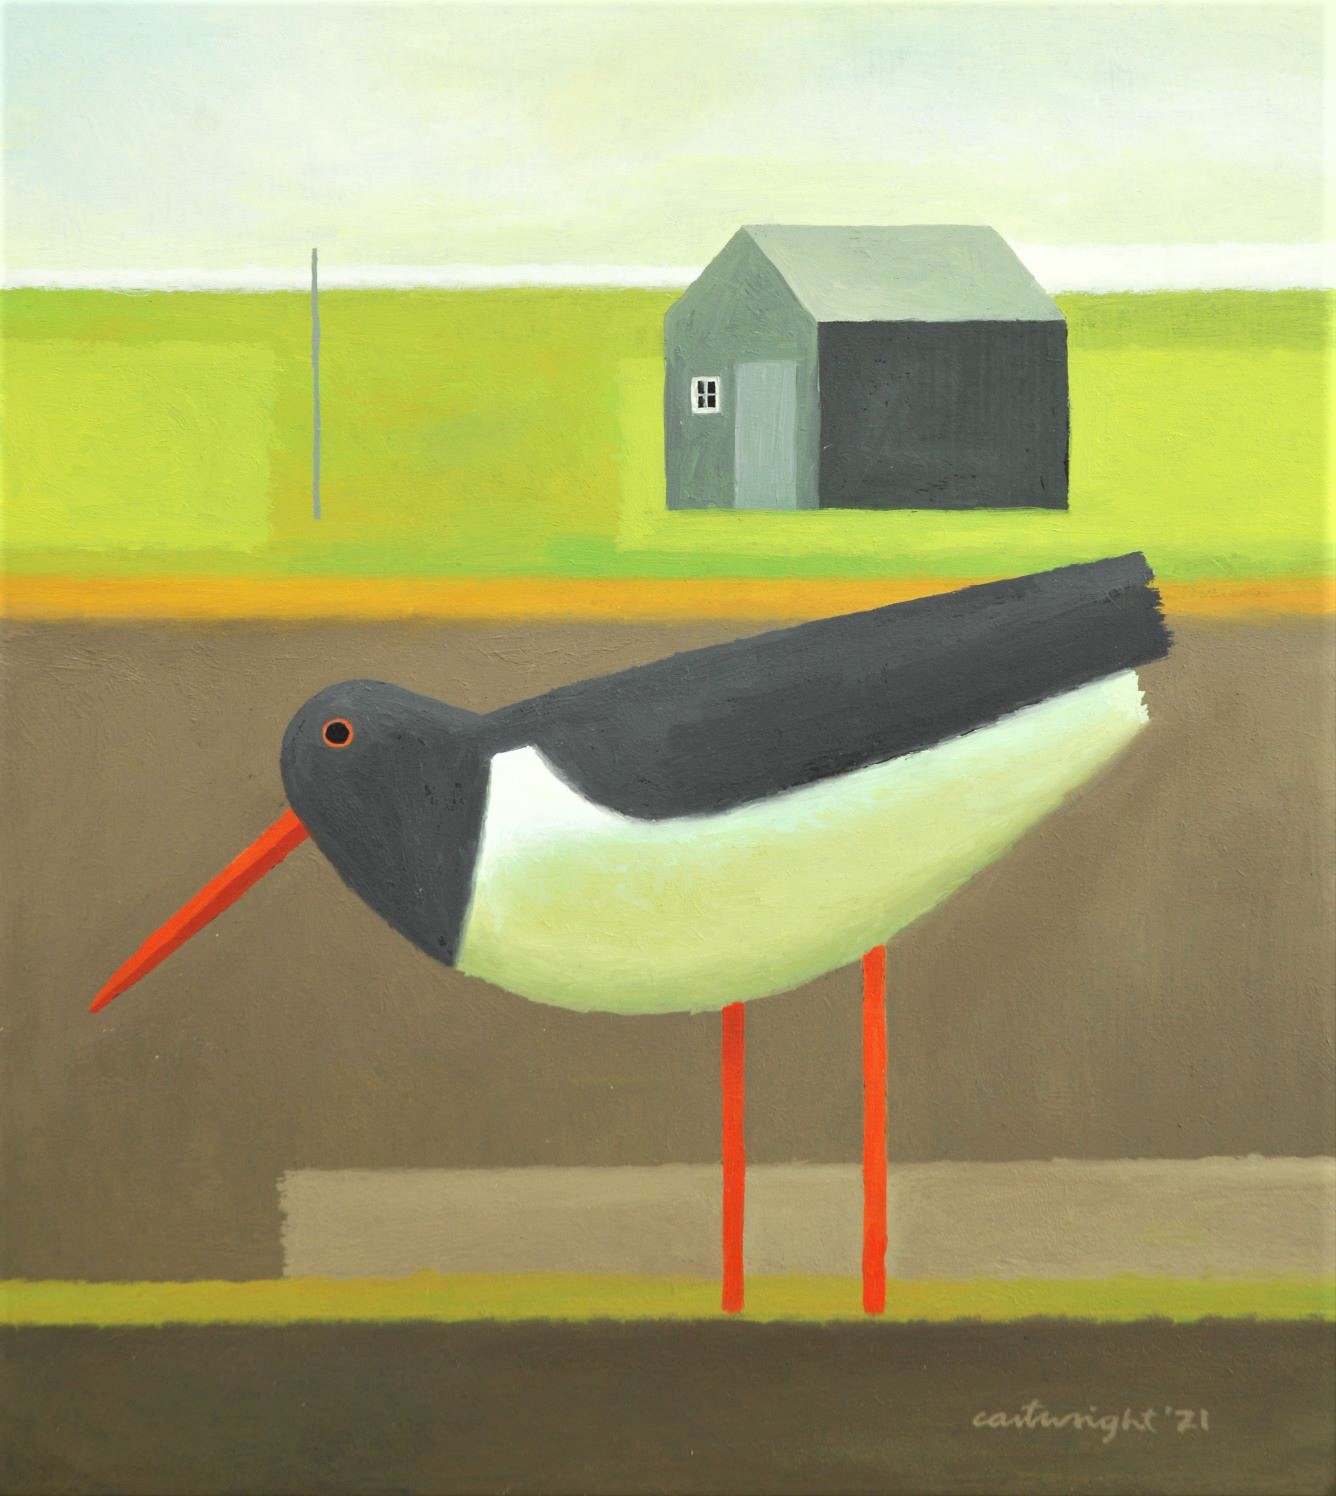 Oystercatcher painting by Reg Cartwright 2021